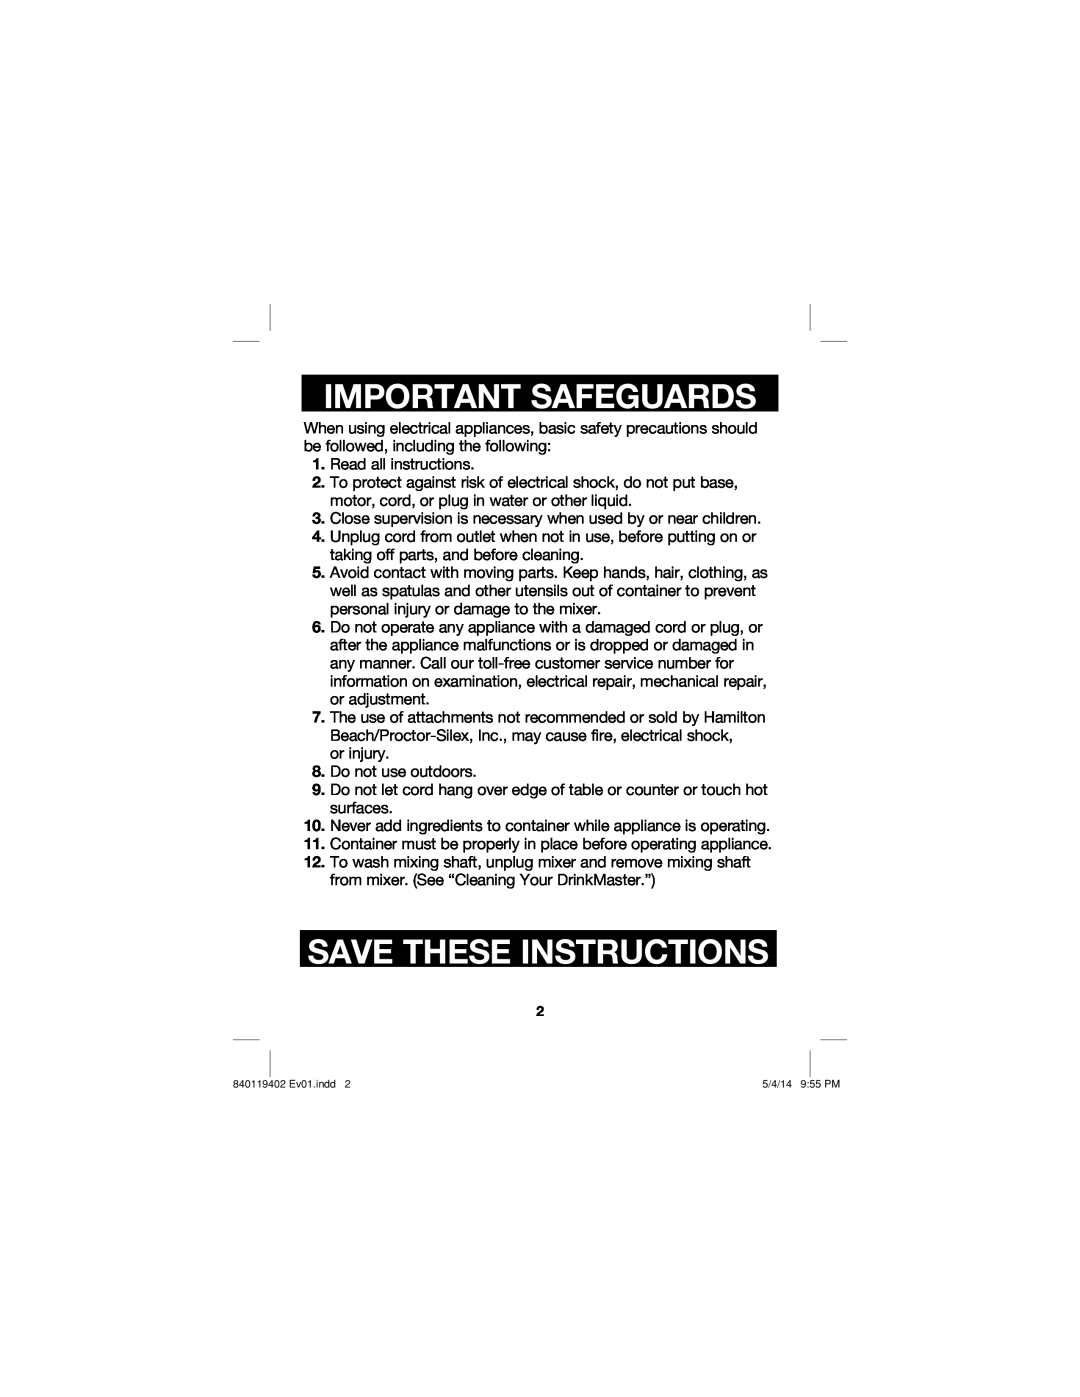 Hamilton Beach 840119402 manual Important Safeguards, Save These Instructions 